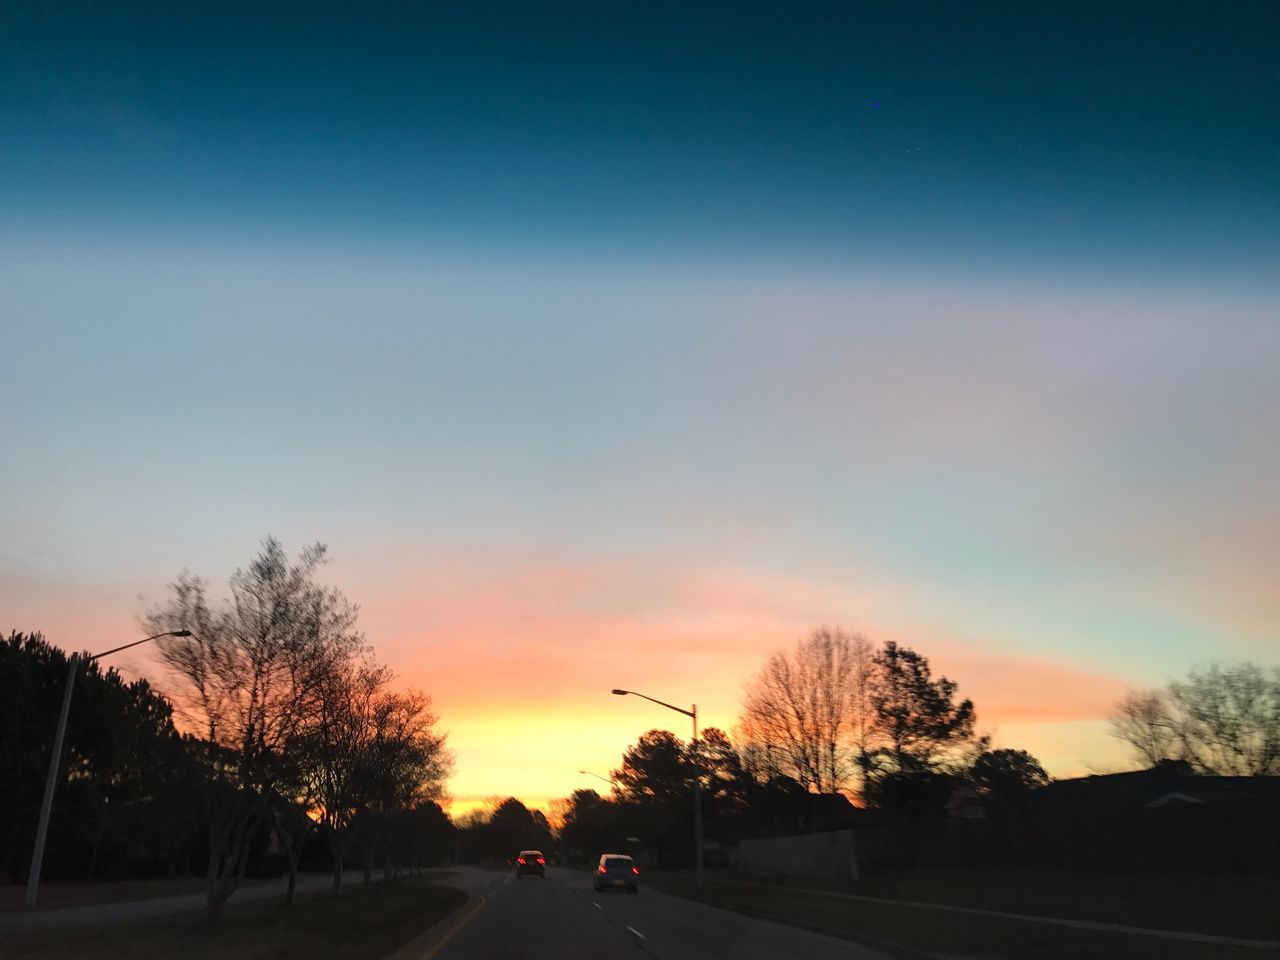 ROAD AGAINST SKY AT SUNSET